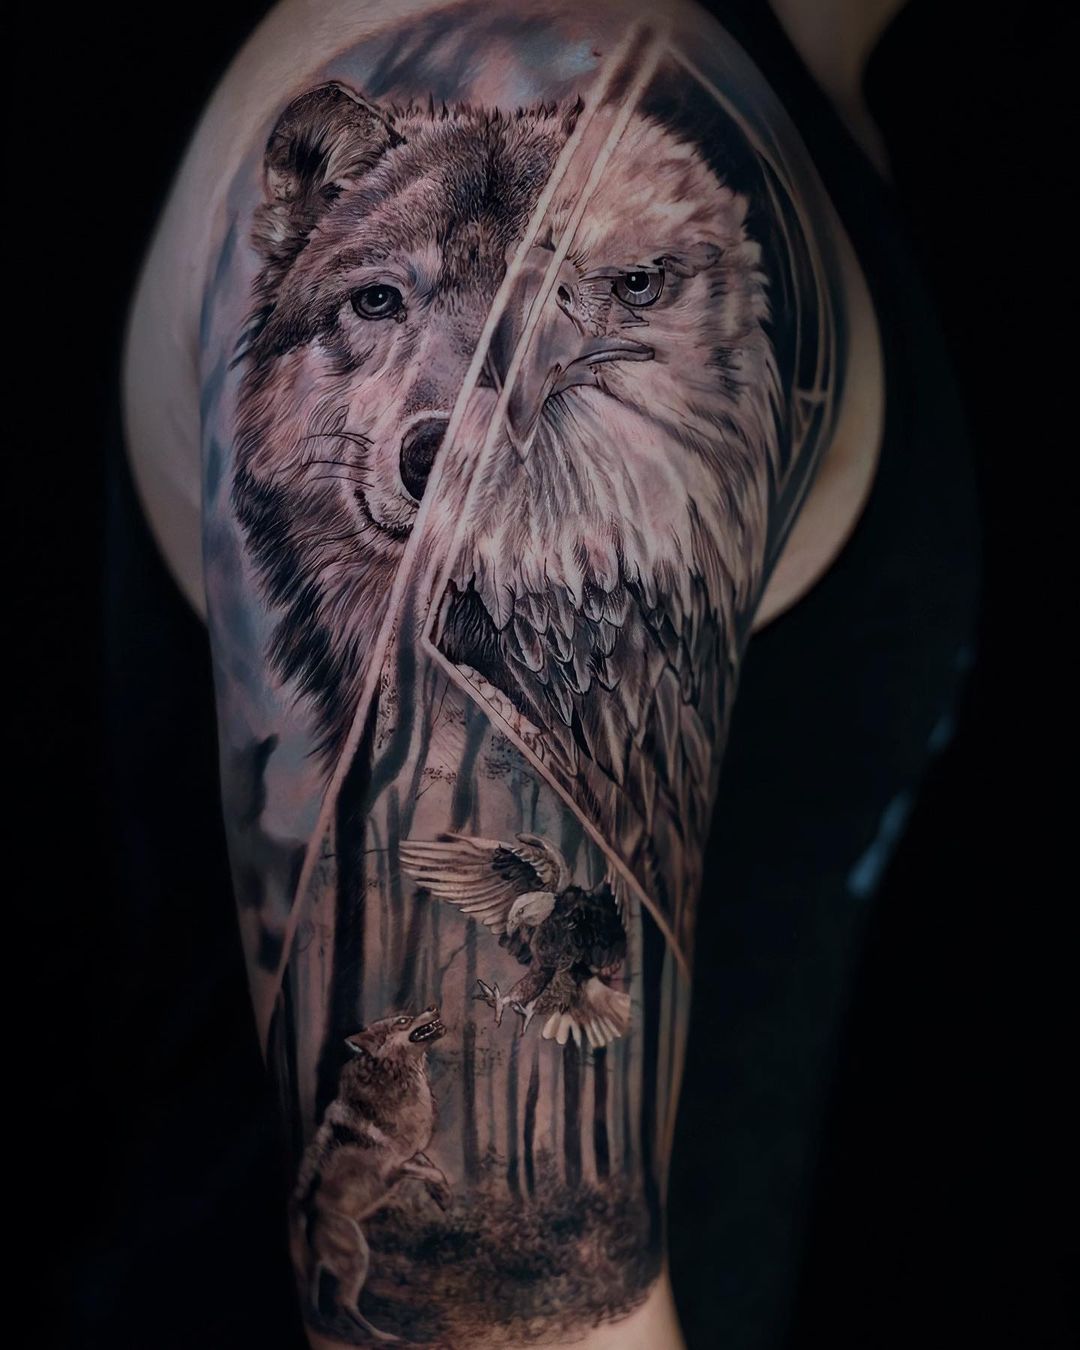 Eagle and Wolf tattoo by raveston on DeviantArt